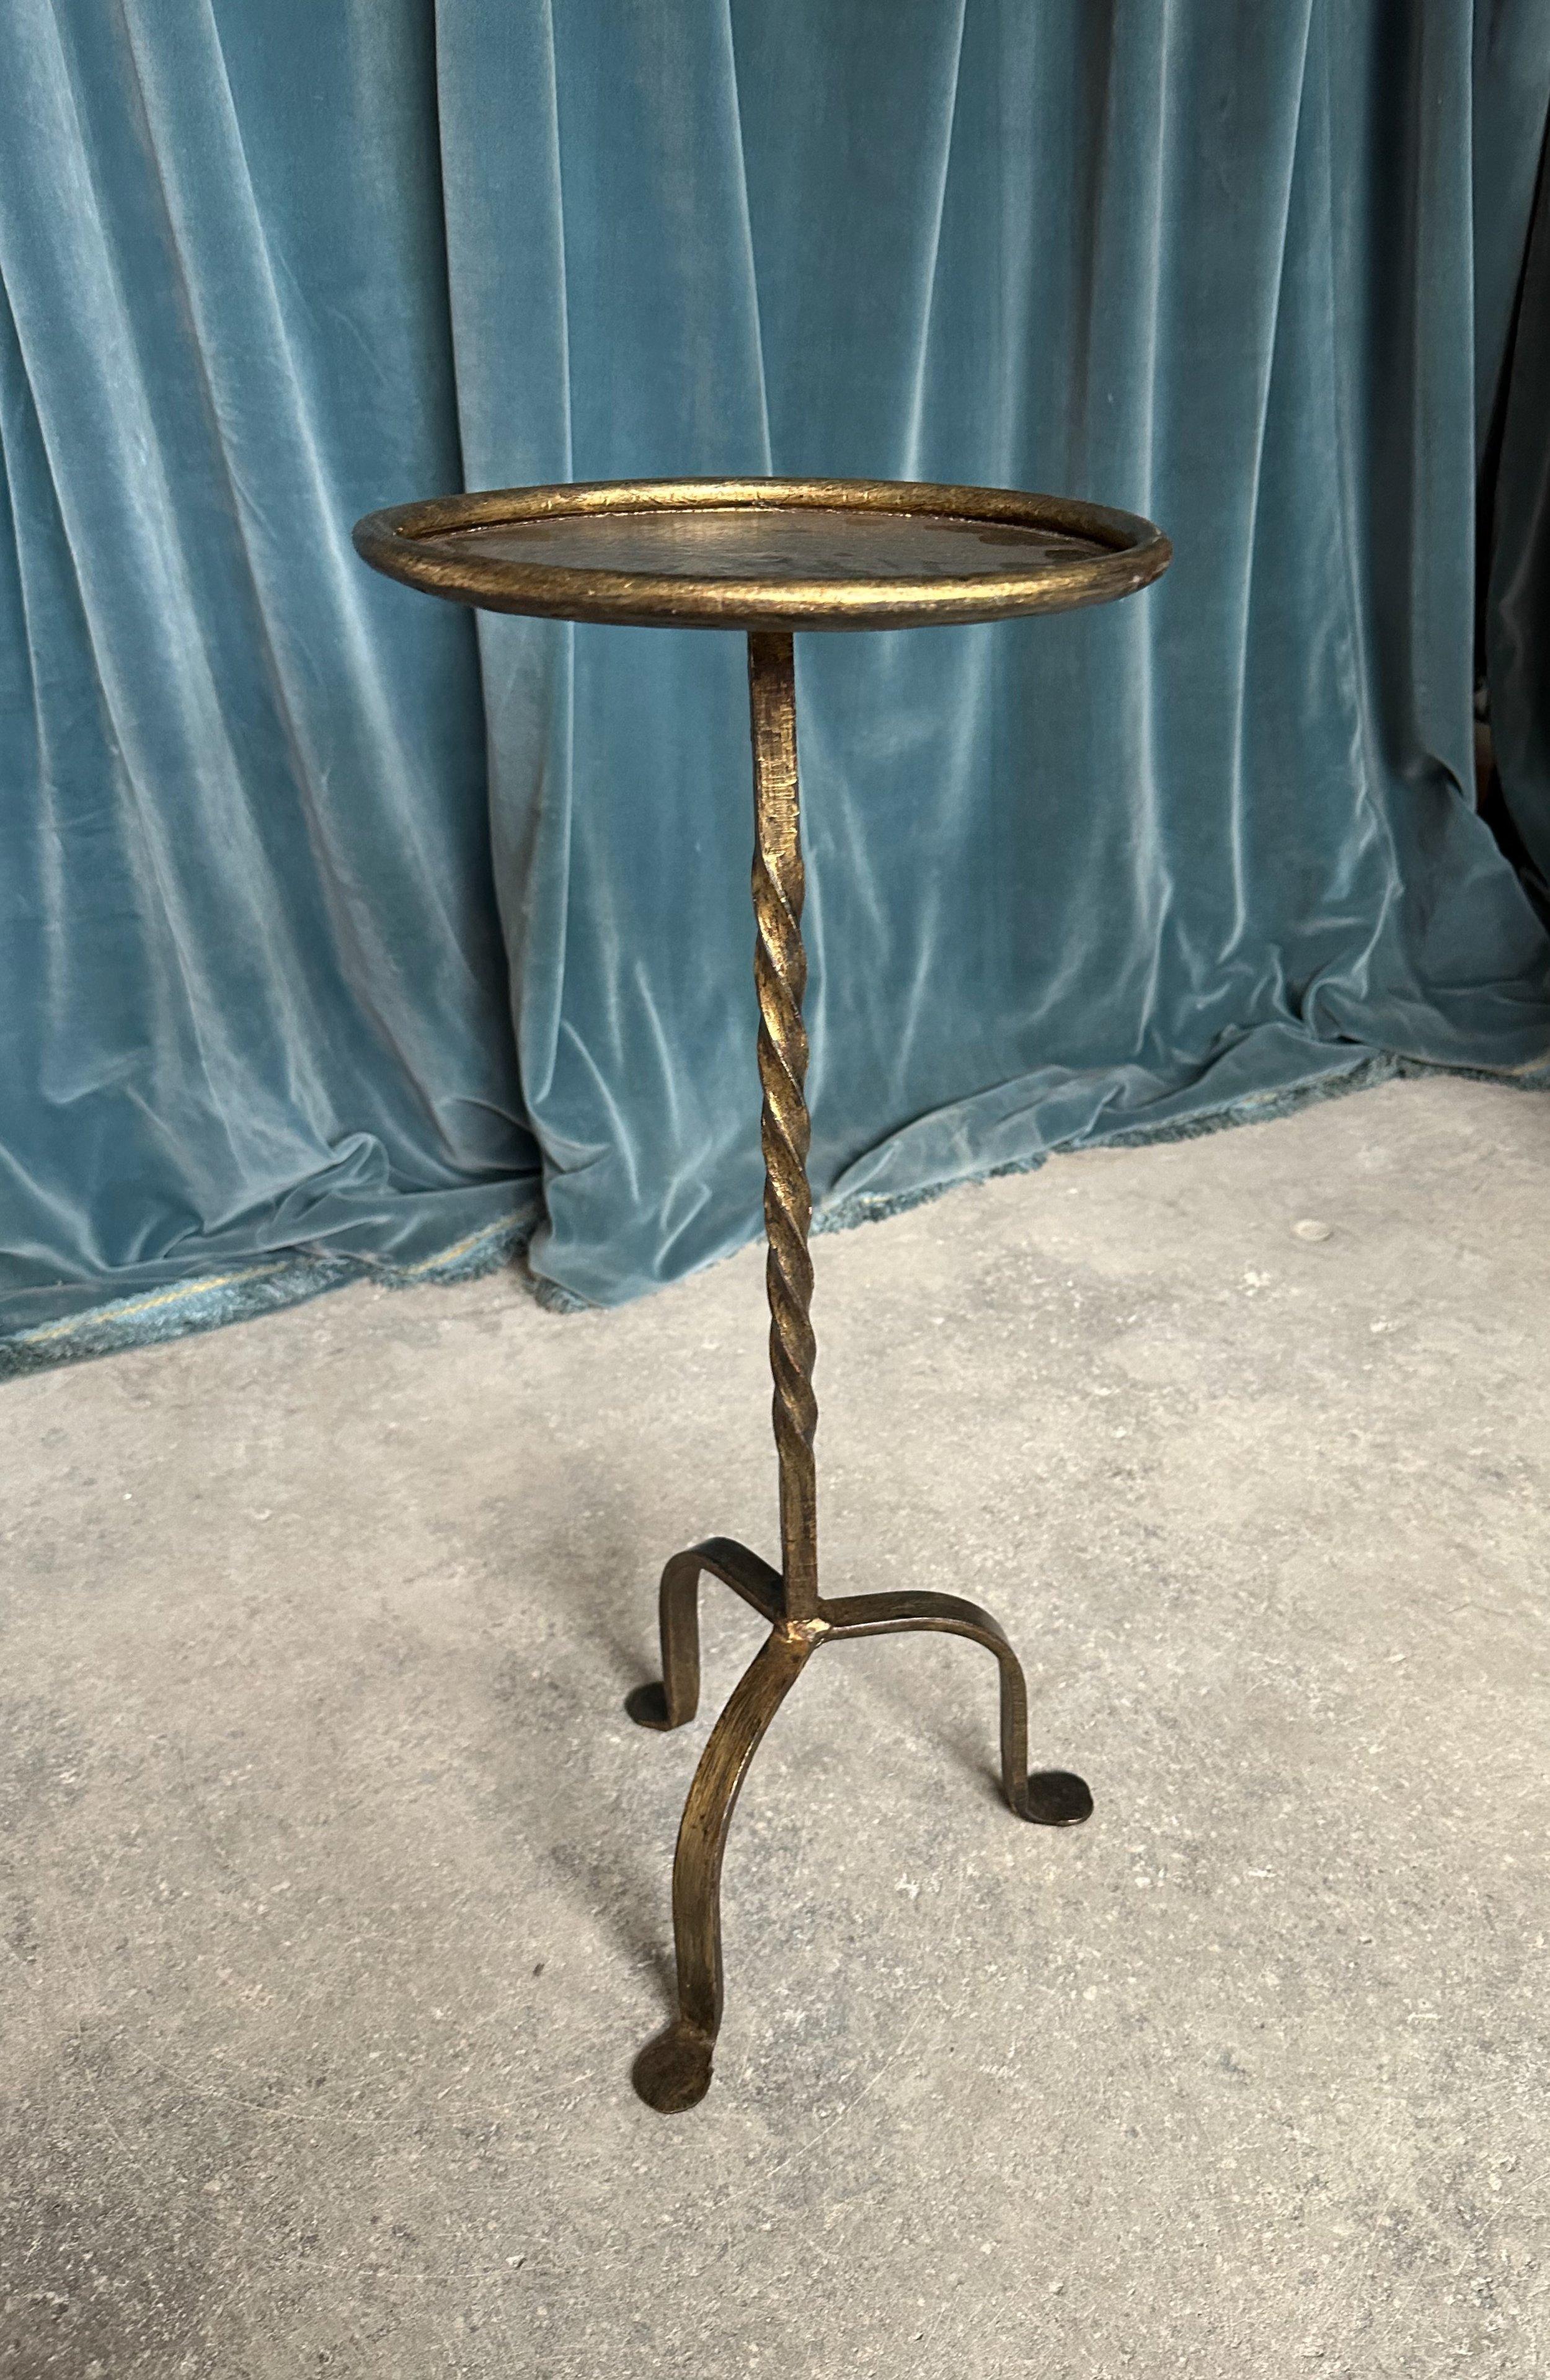 A handsome Spanish gilt iron drinks table, recently crafted to our design and specifications that features a twisted stem design mounted on a sturdy tripod base, creating an aesthetically pleasing silhouette. Recently made by European artisans using